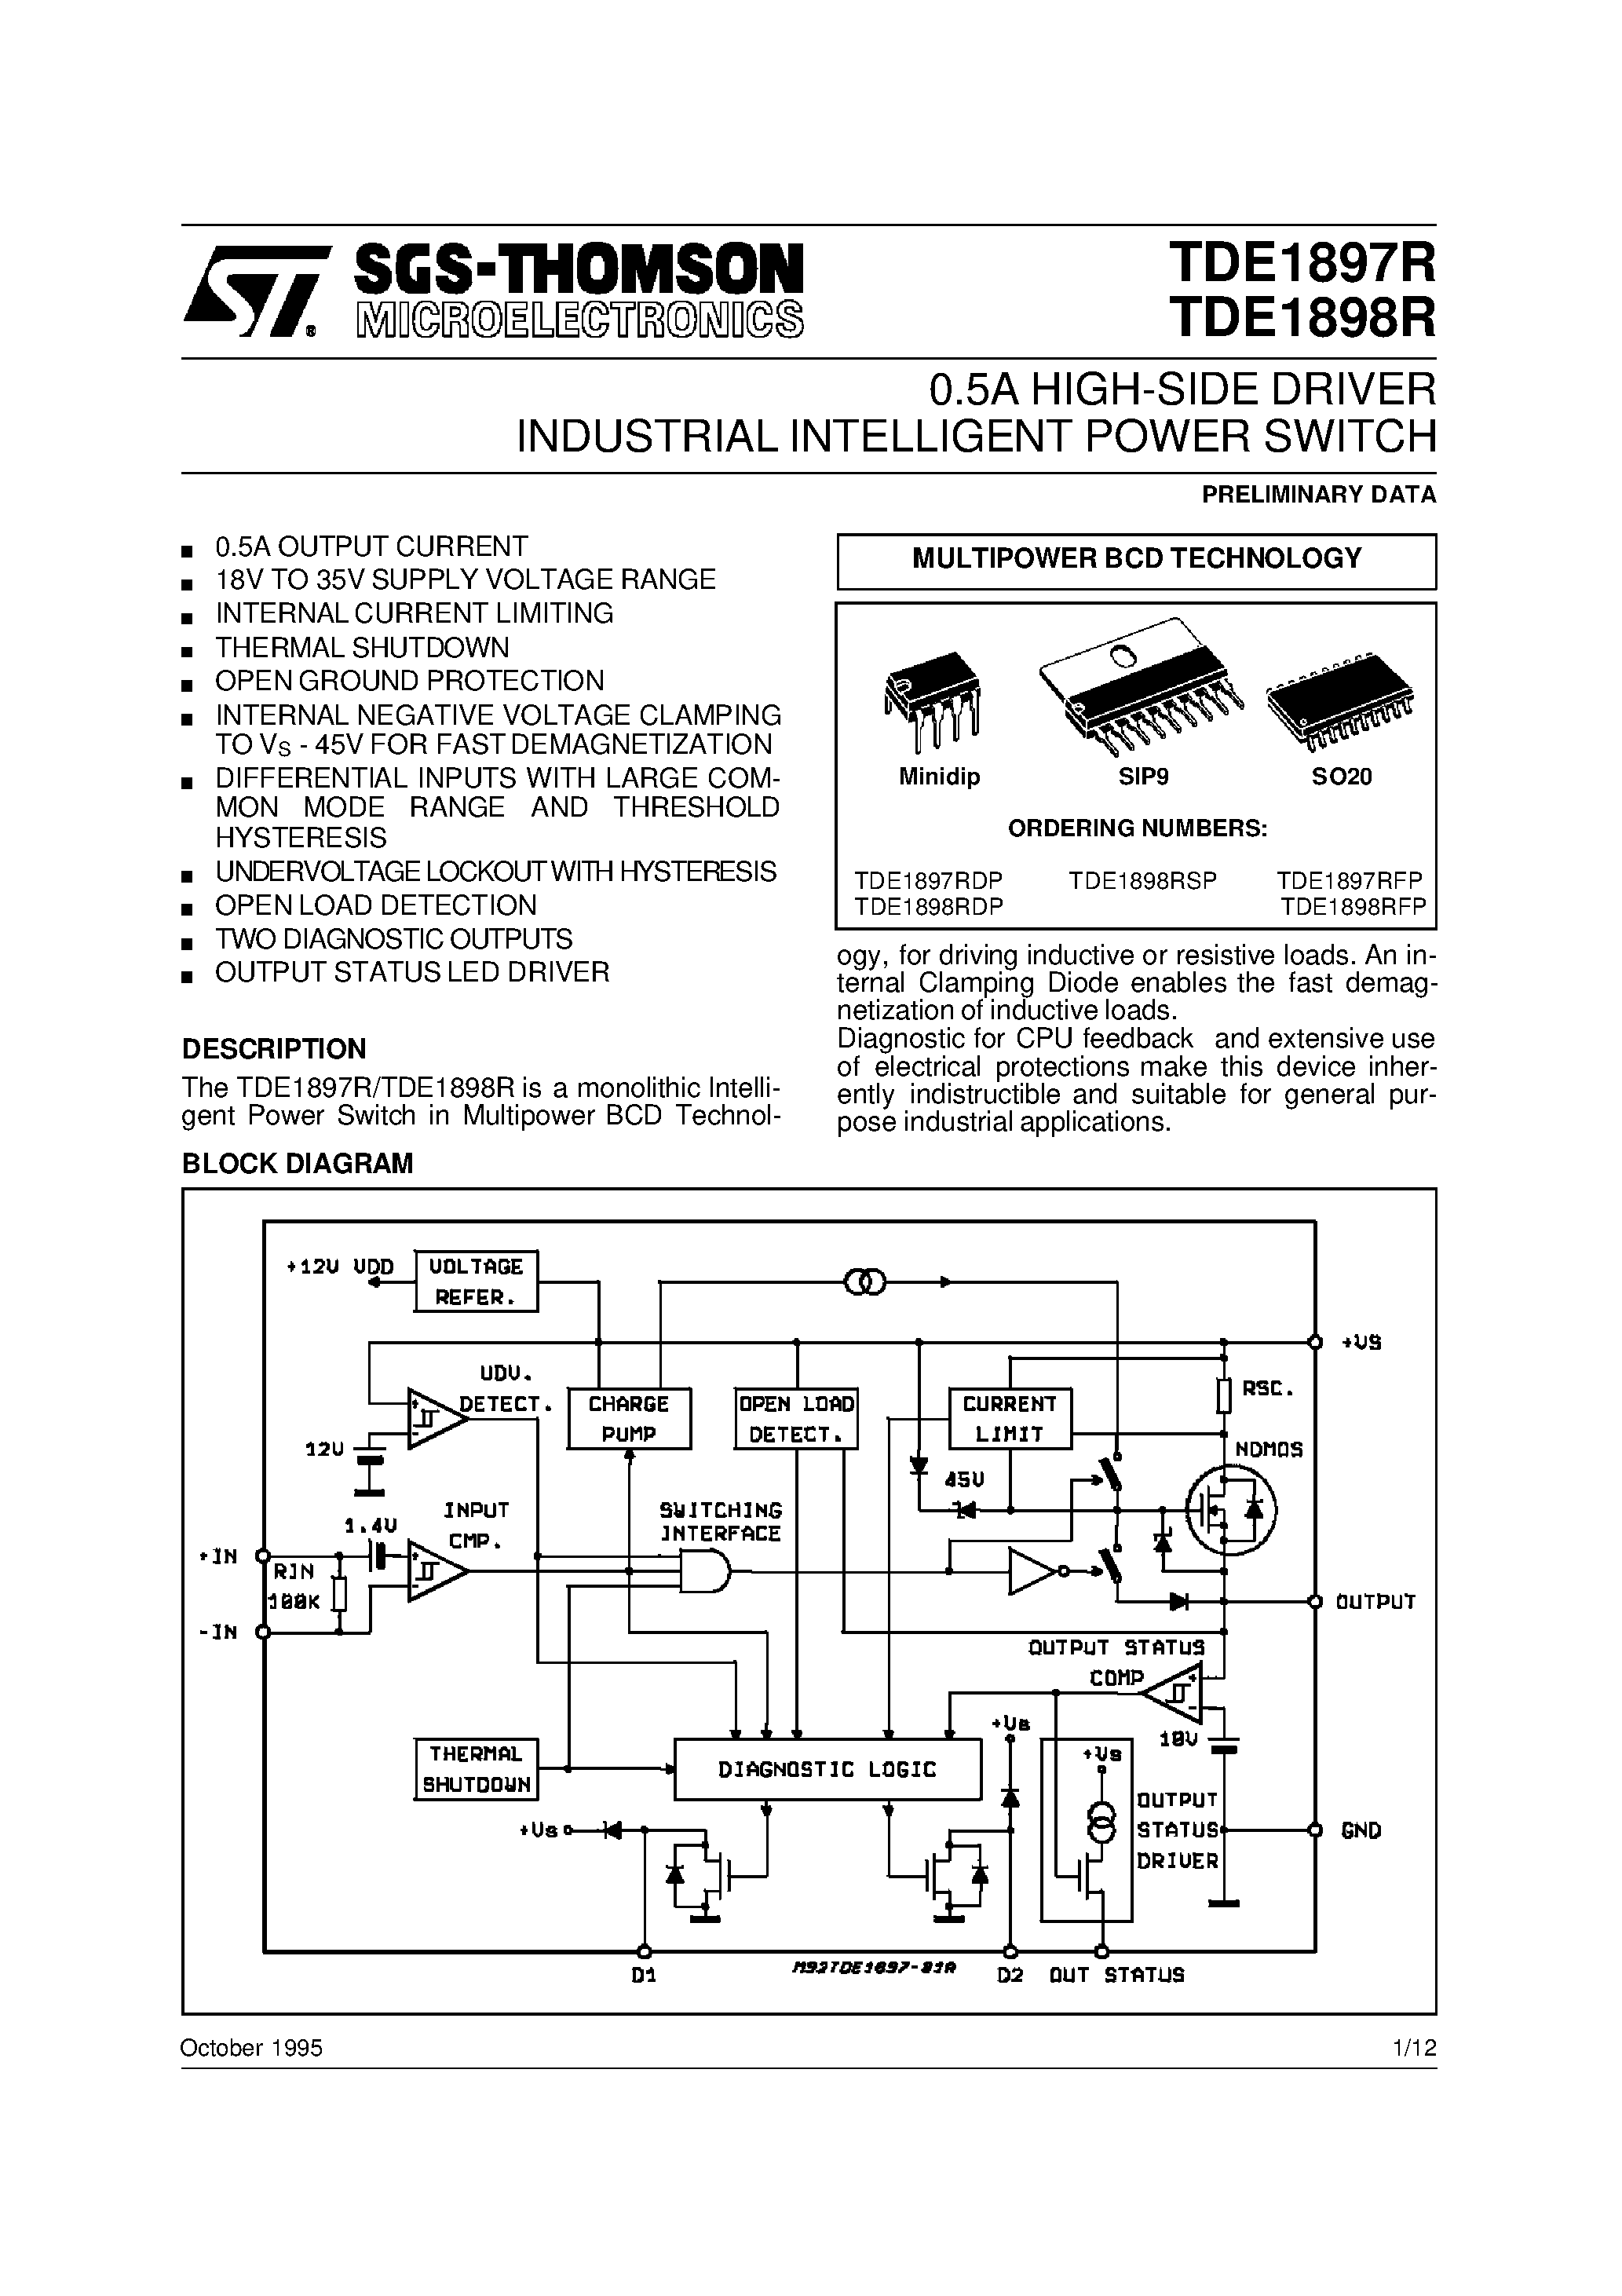 Даташит TDE1898RSP-0.5A HIGH-SIDE DRIVER INDUSTRIAL INTELLIGENT POWER SWITCH страница 1